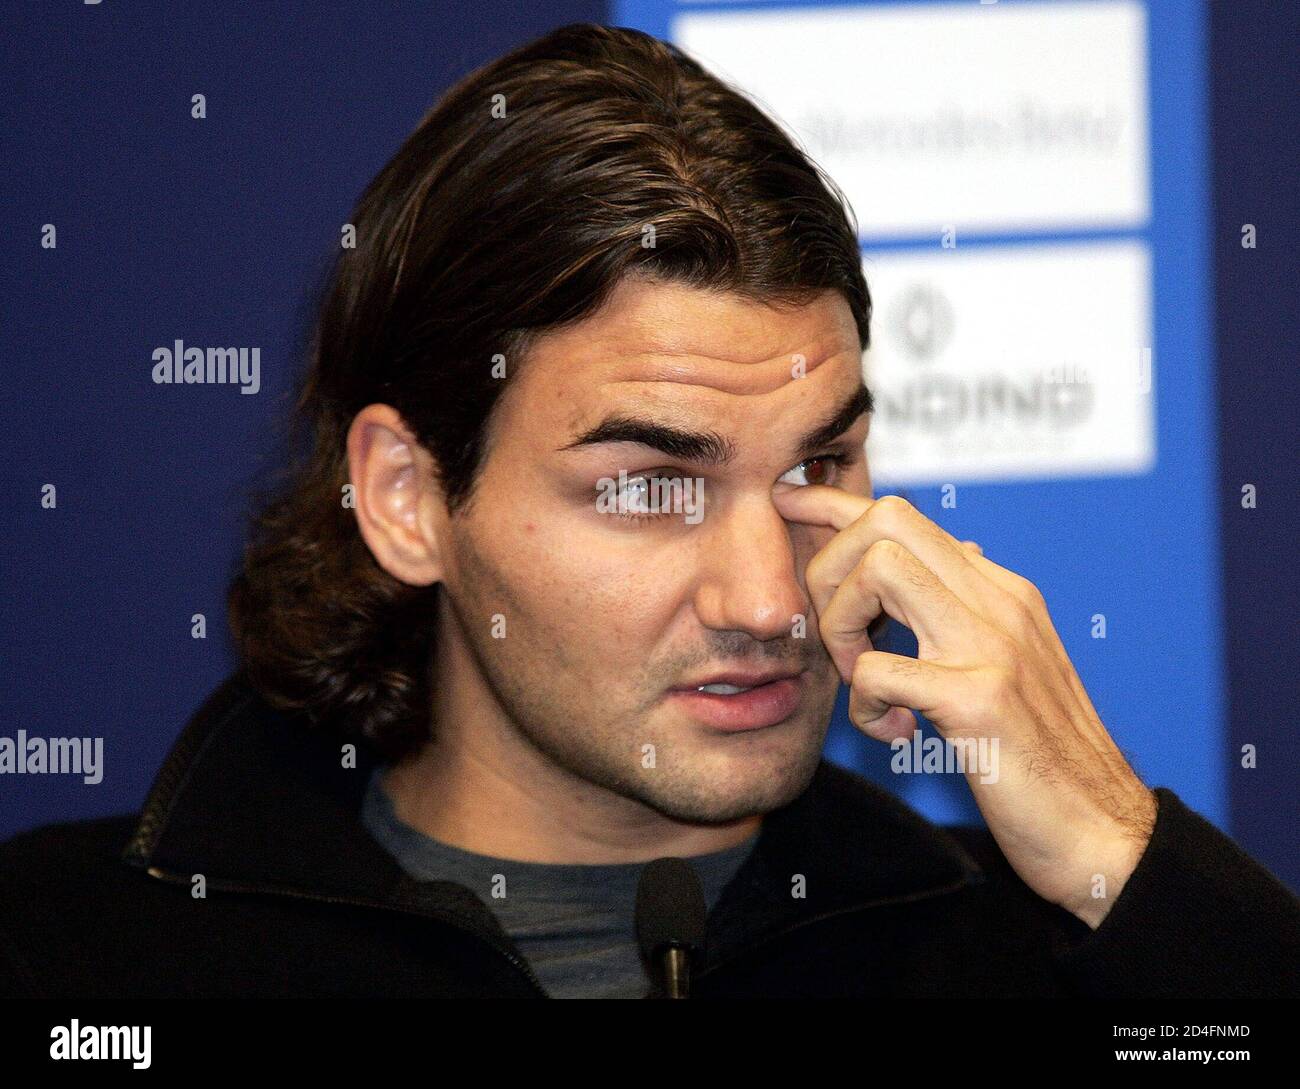 World number one Roger Federer of Switzerland gestures as he announces his  withdrawal from the Davidoff Swiss Indoors tennis tournament in Basel.  World number one Roger Federer of Switzerland gestures as he